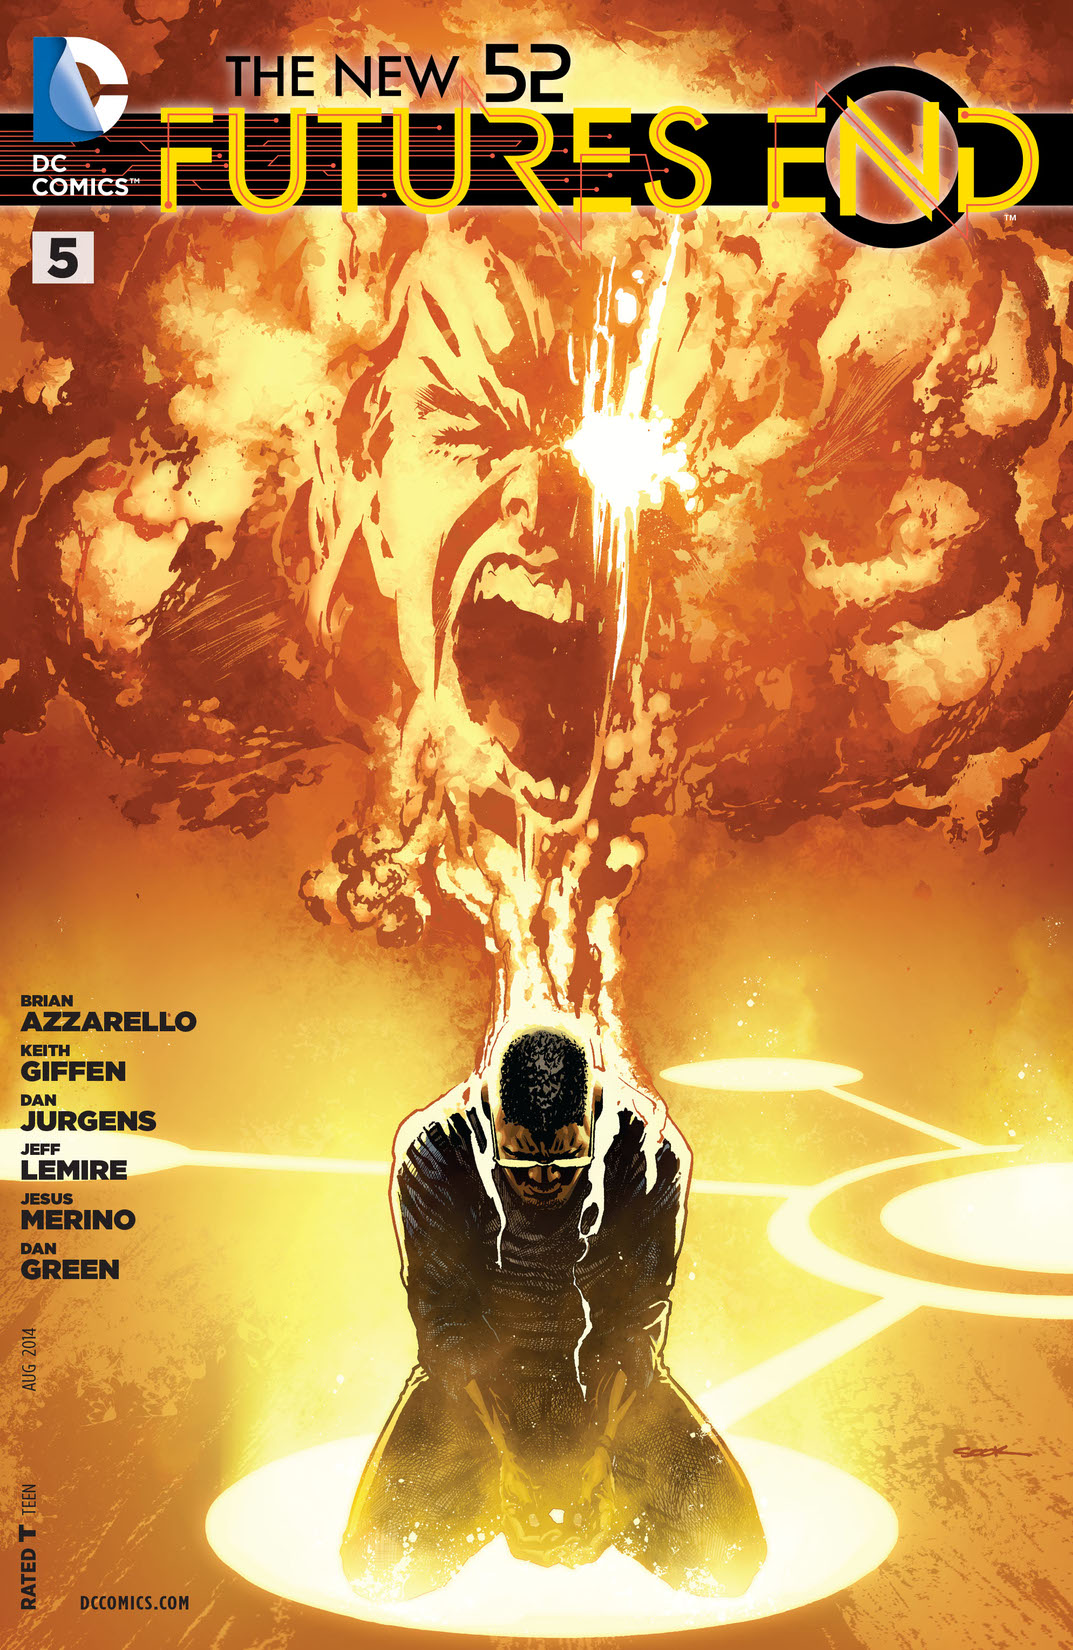 The New 52: Futures End #5 preview images